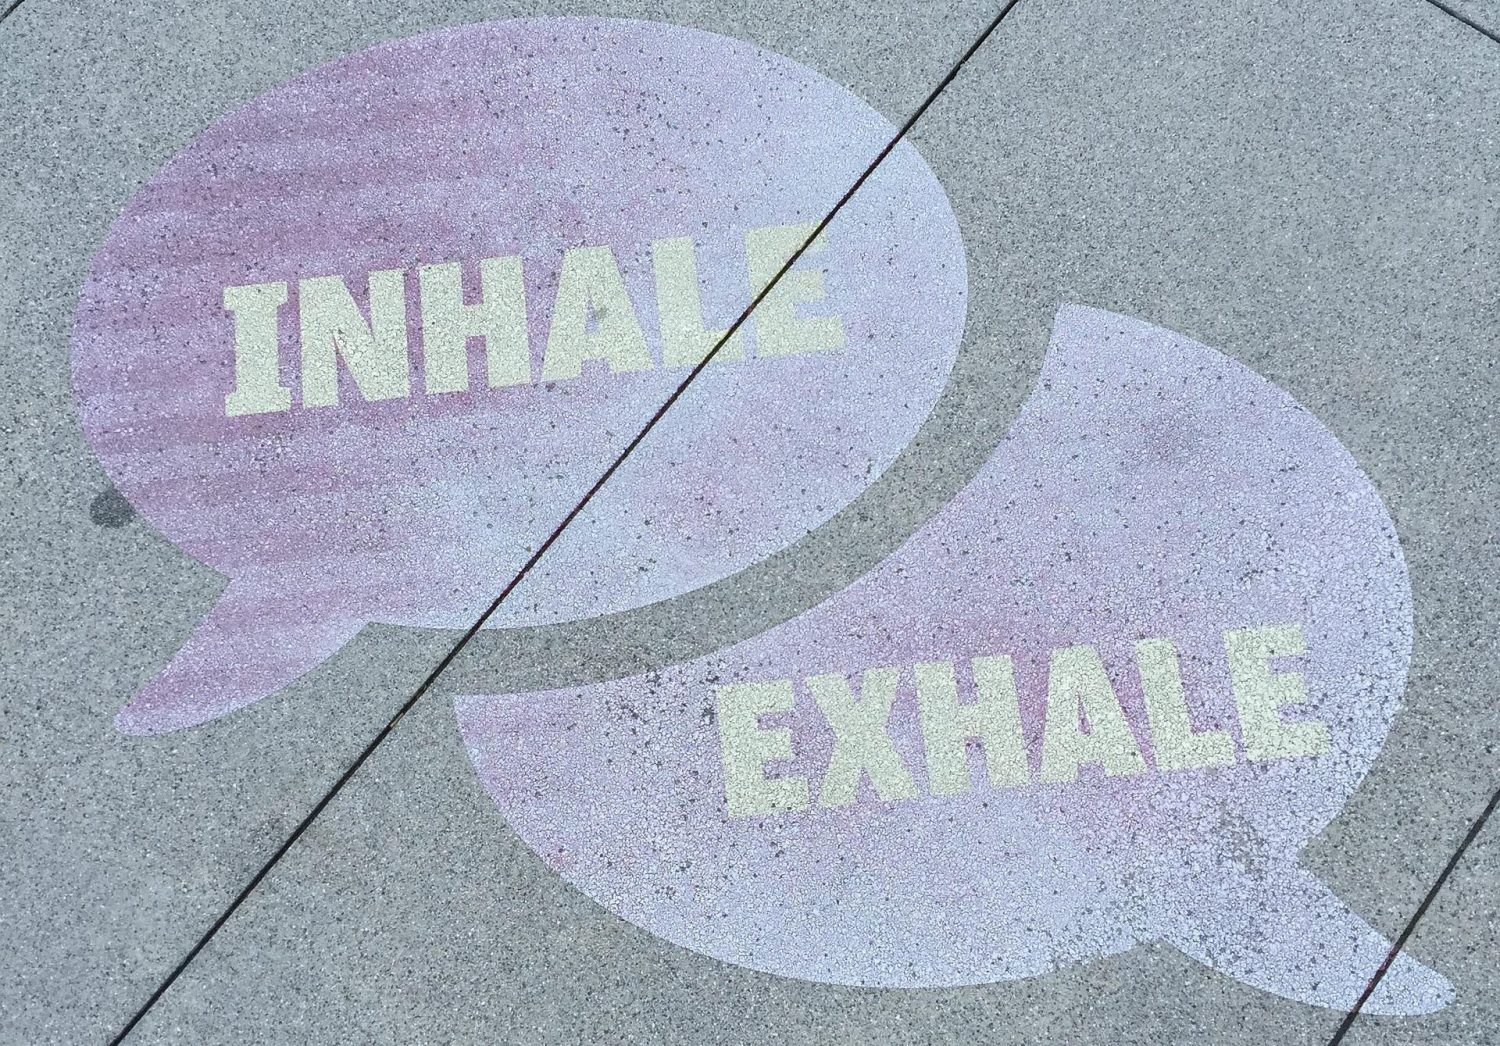 Street art says inhale and exhale. Breathing exercises for long covid